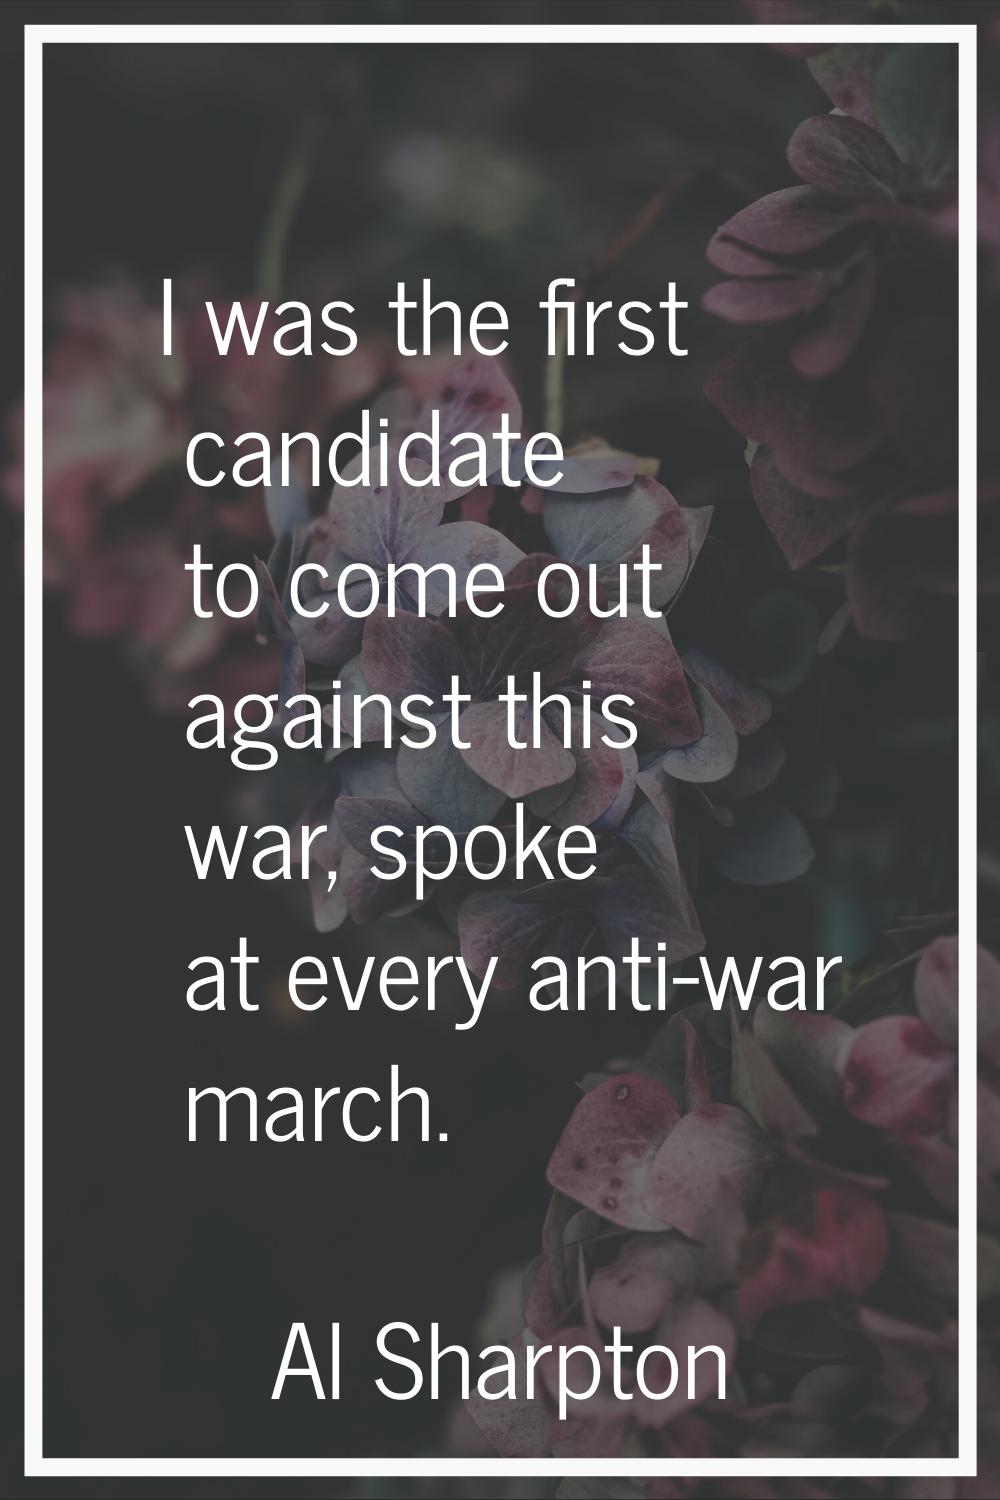 I was the first candidate to come out against this war, spoke at every anti-war march.